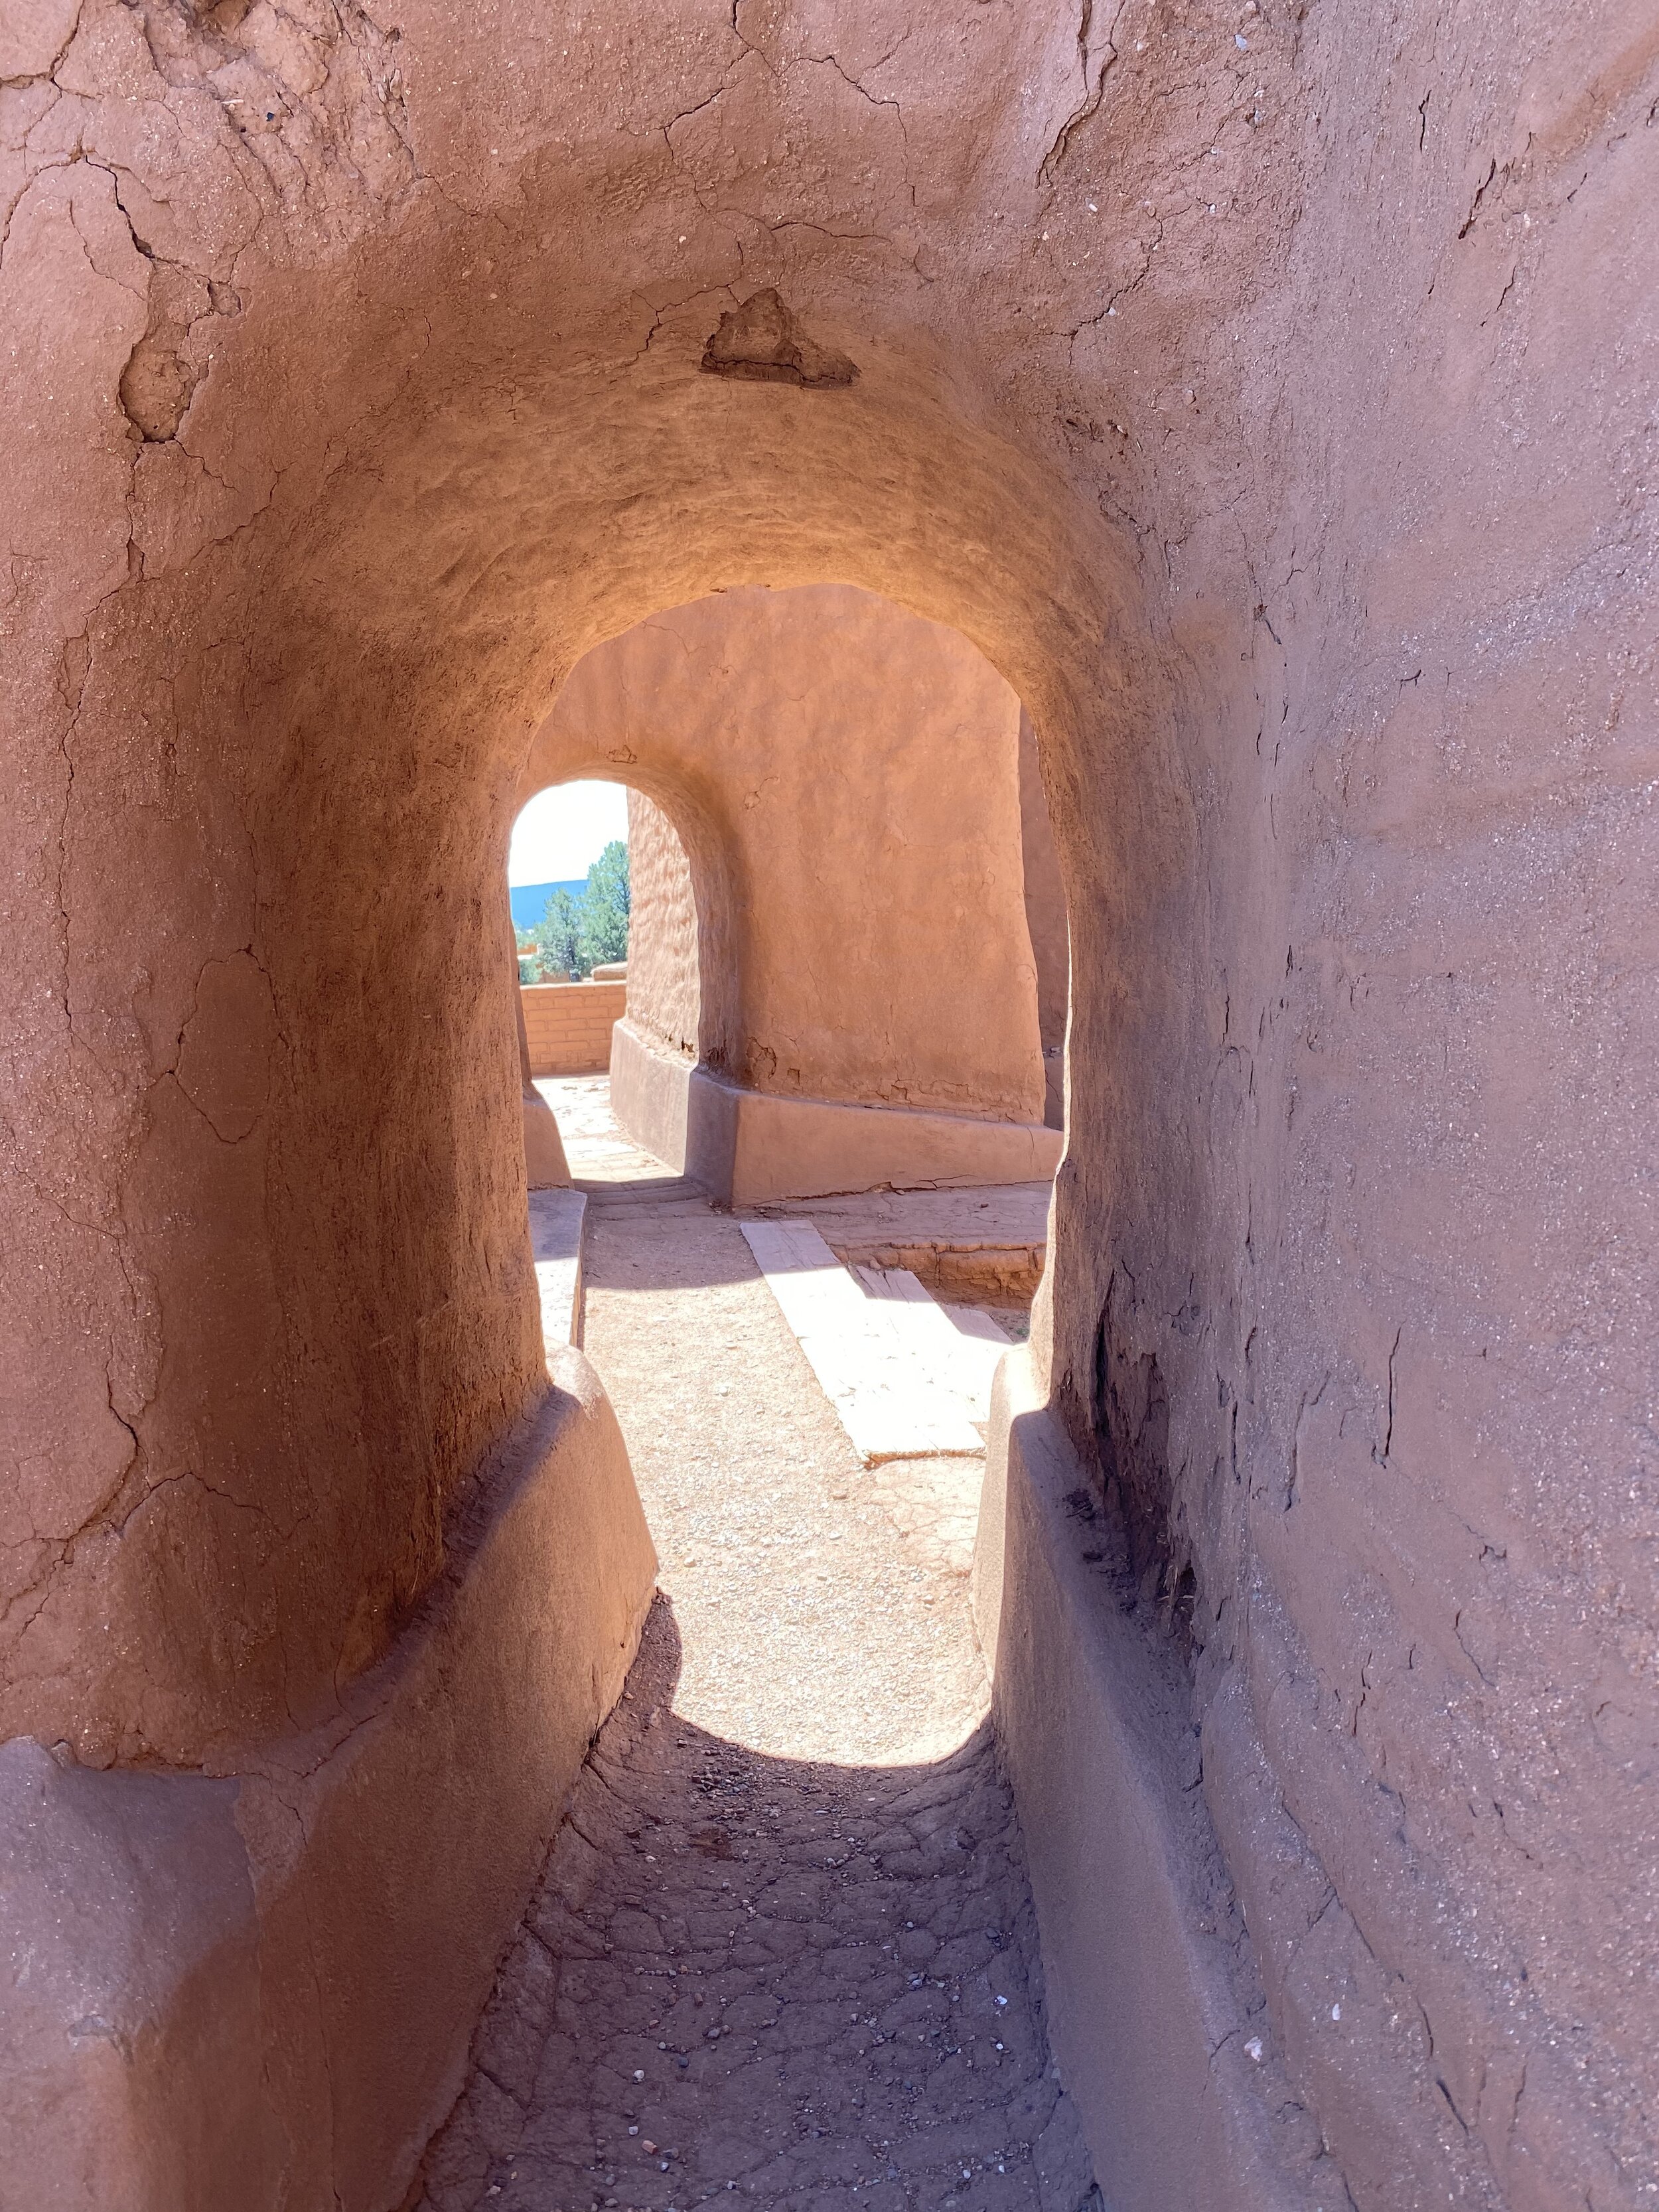 Adobe doorway inside the remains of the mission church at Pecos National Historical Park